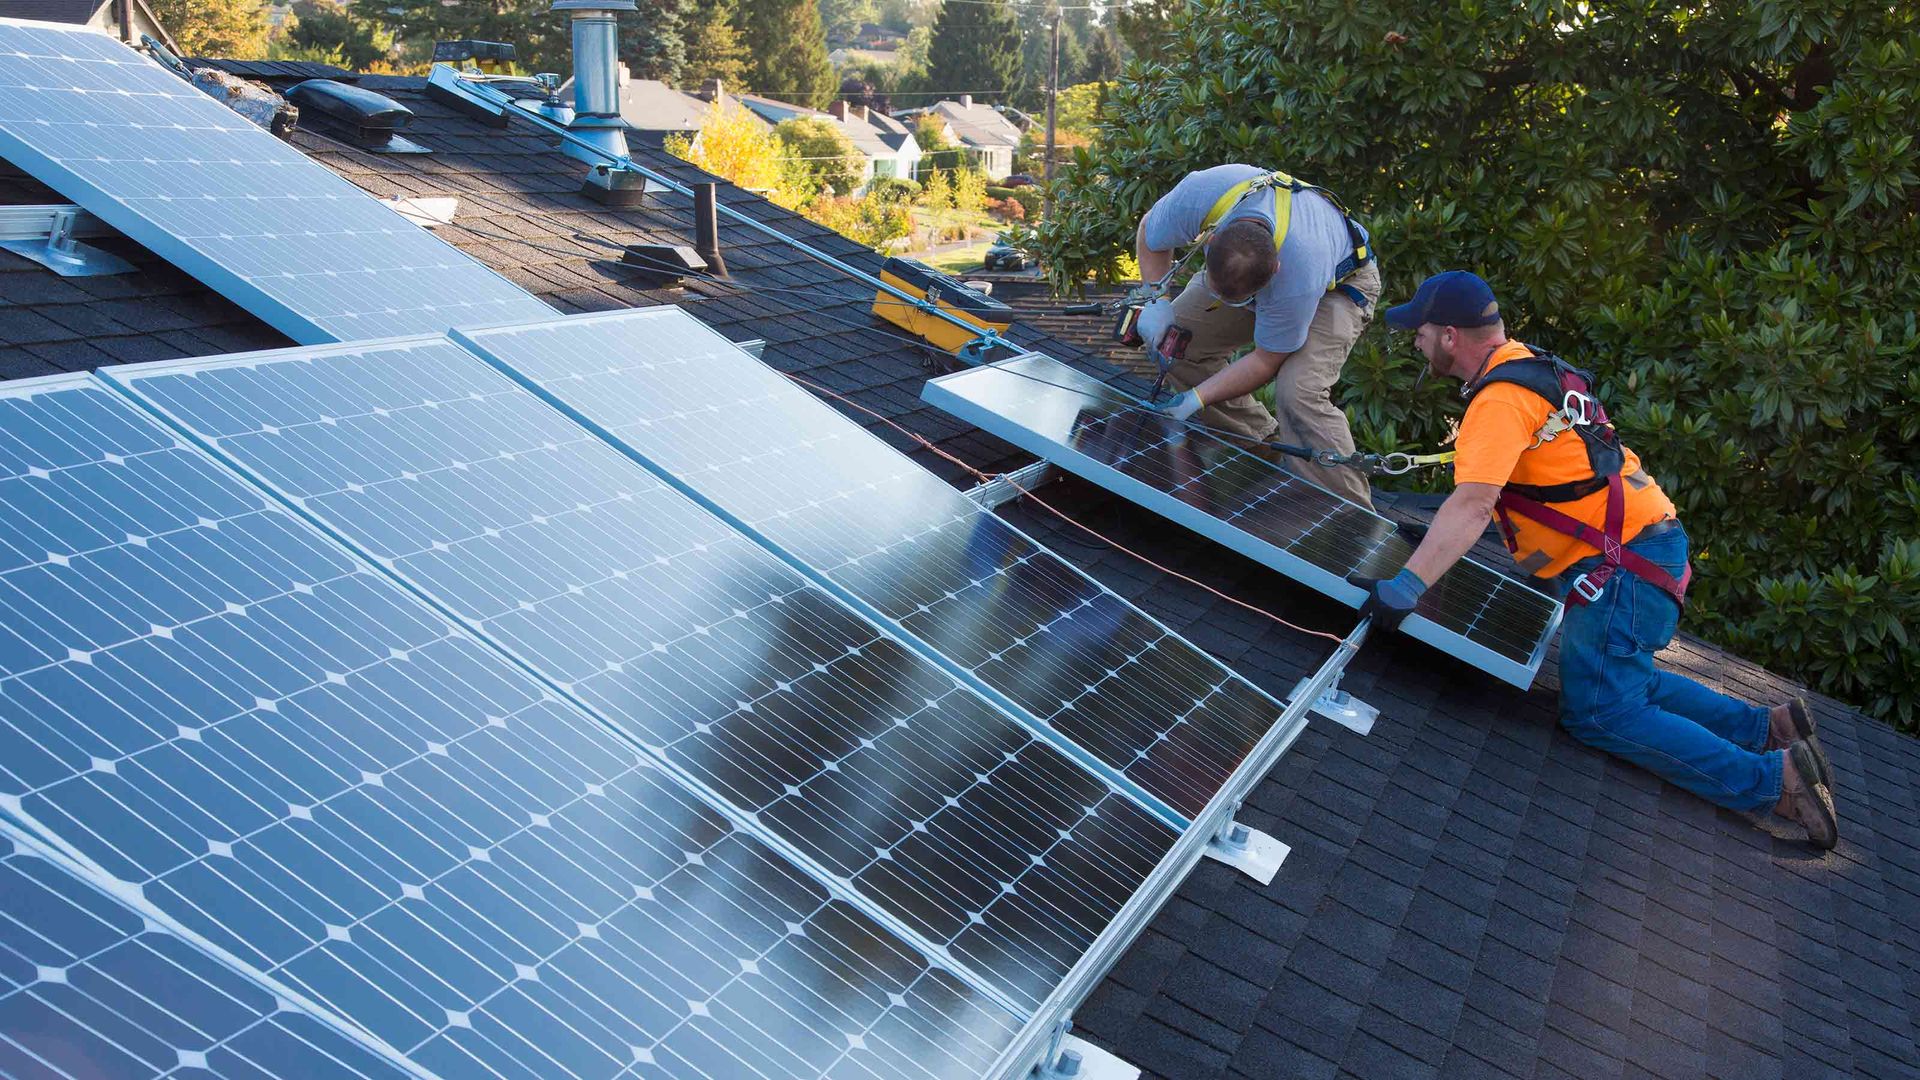 tax-credits-for-energy-efficient-home-improvements